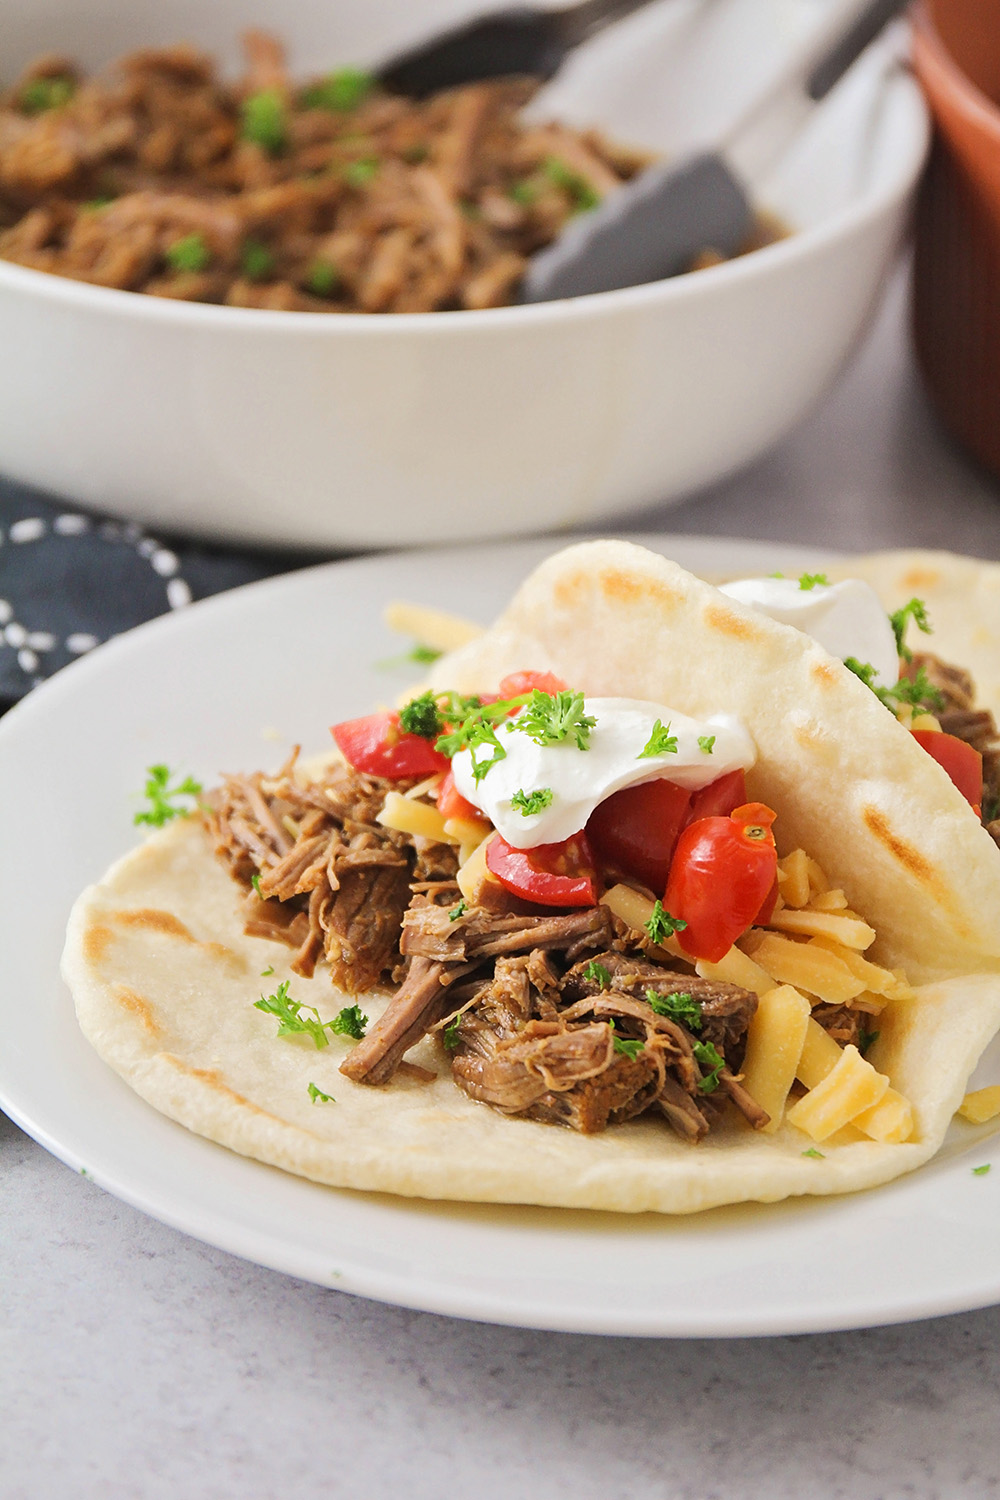 These Instant Pot shredded beef tacos are so easy to make, and full of delicious flavor!